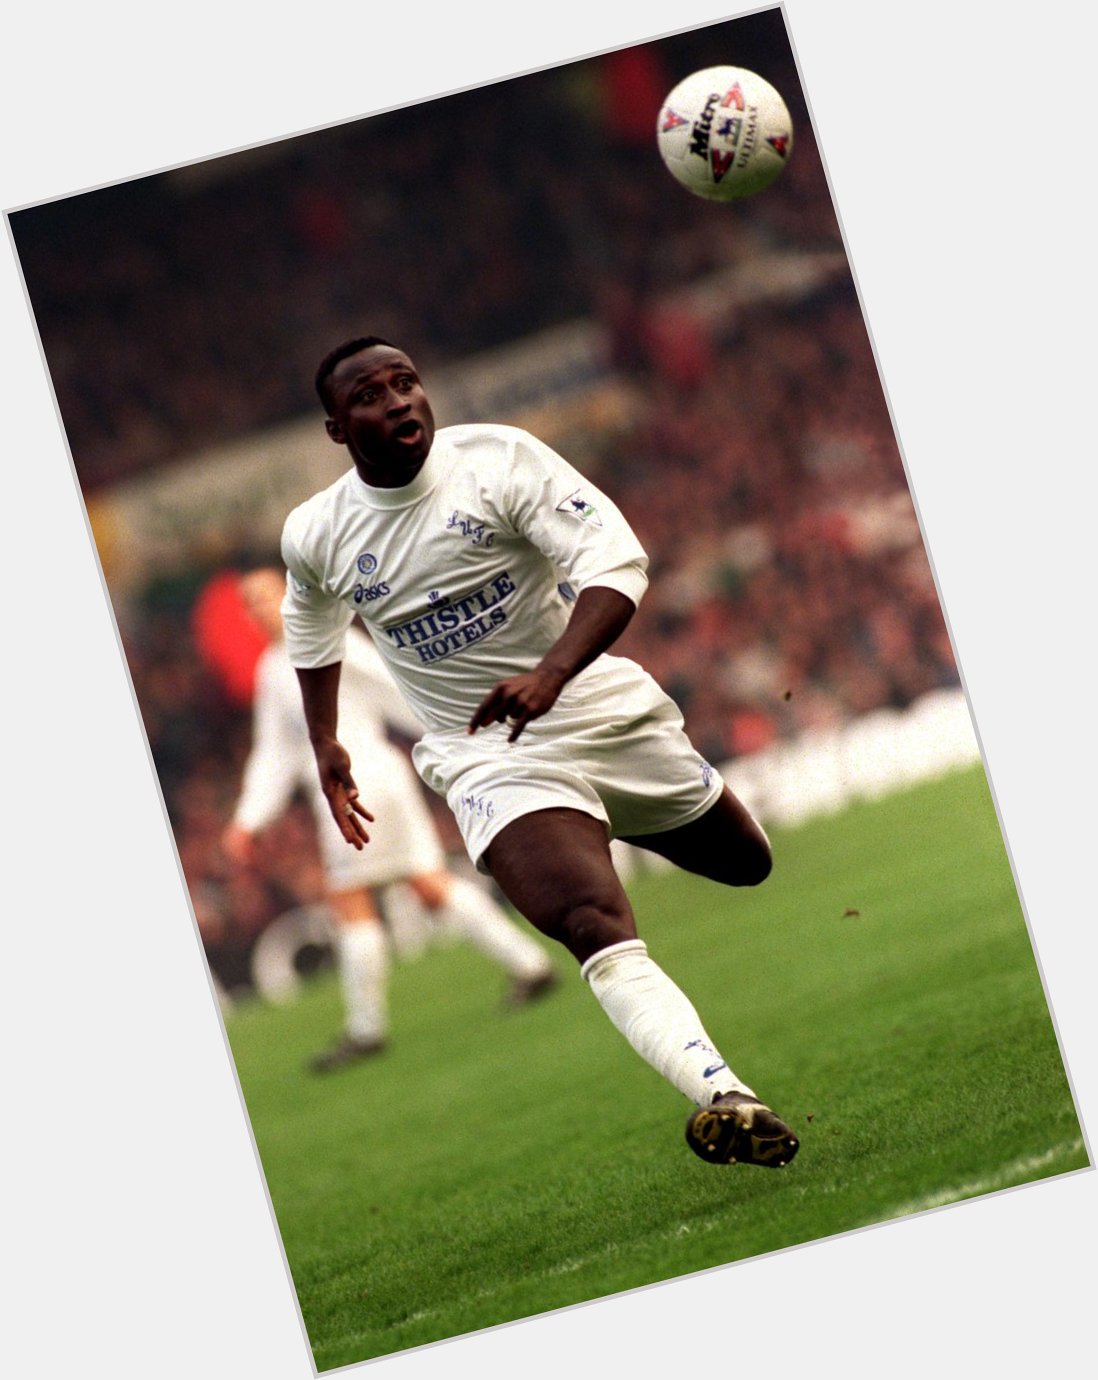 Happy Birthday to the king of volleys Tony Yeboah who turned 52 today!

That boy could hit a ball 